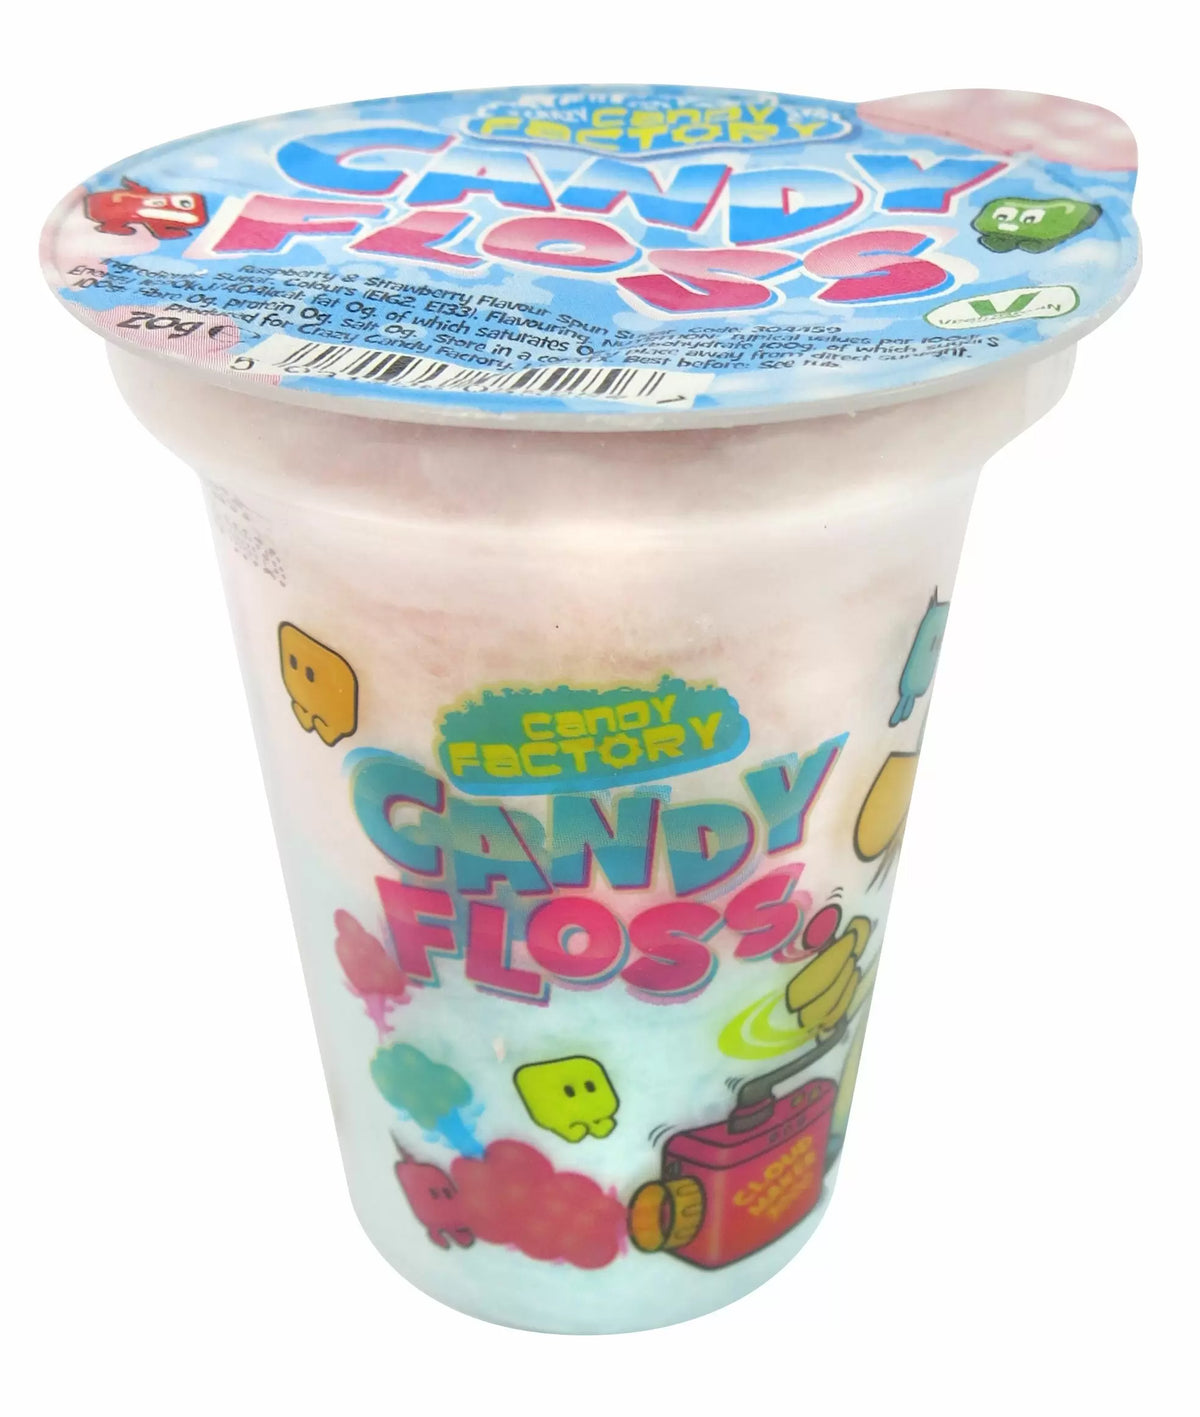 Crazy Candy Factory Candy Floss Cups 20g